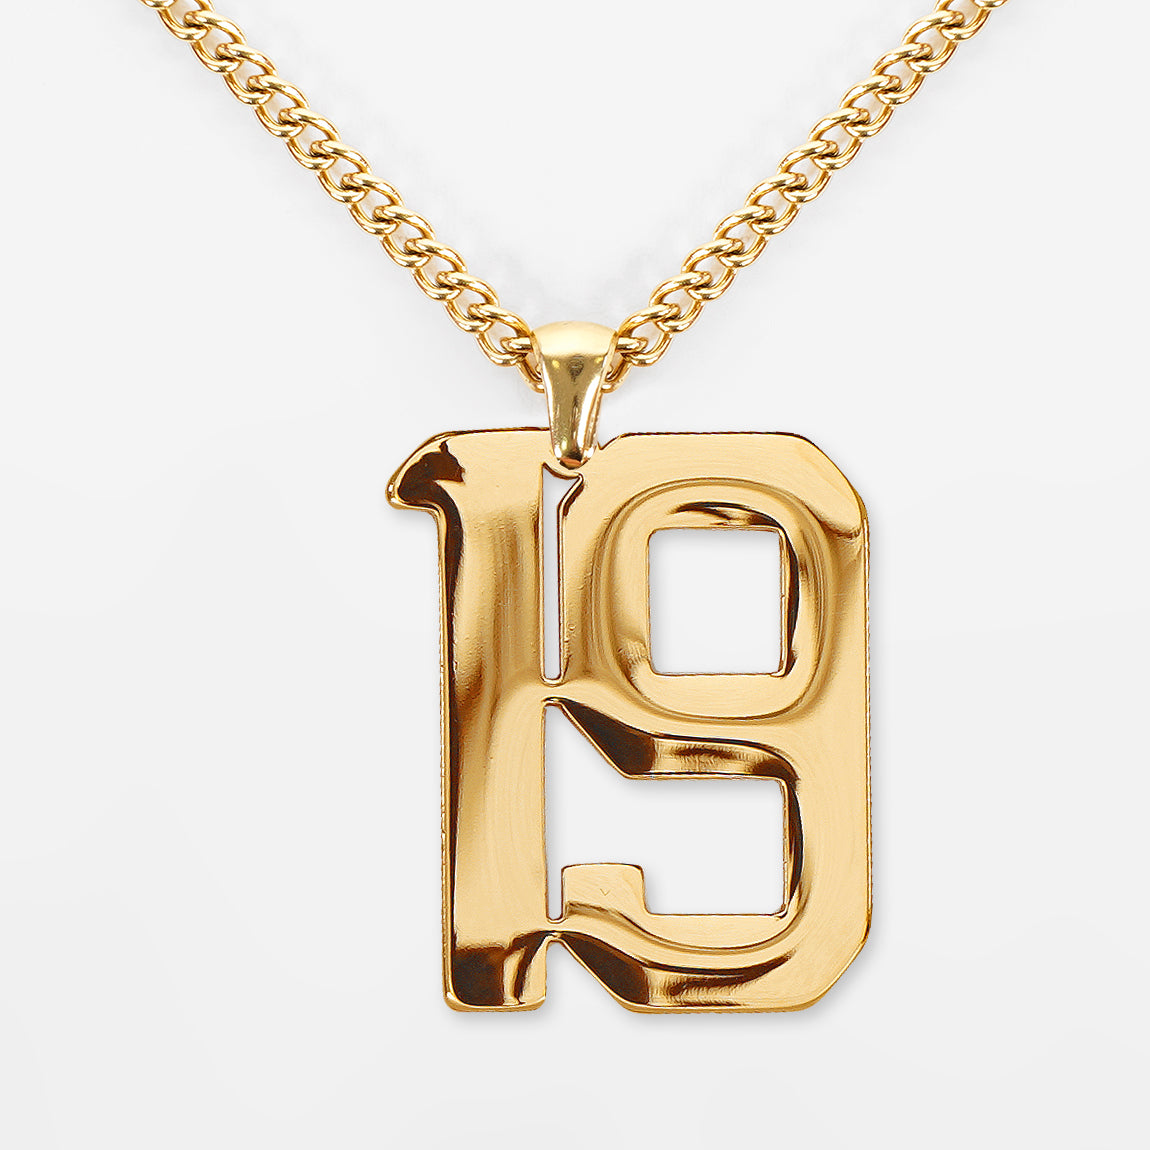 19 Number Pendant with Chain Necklace - Gold Plated Stainless Steel